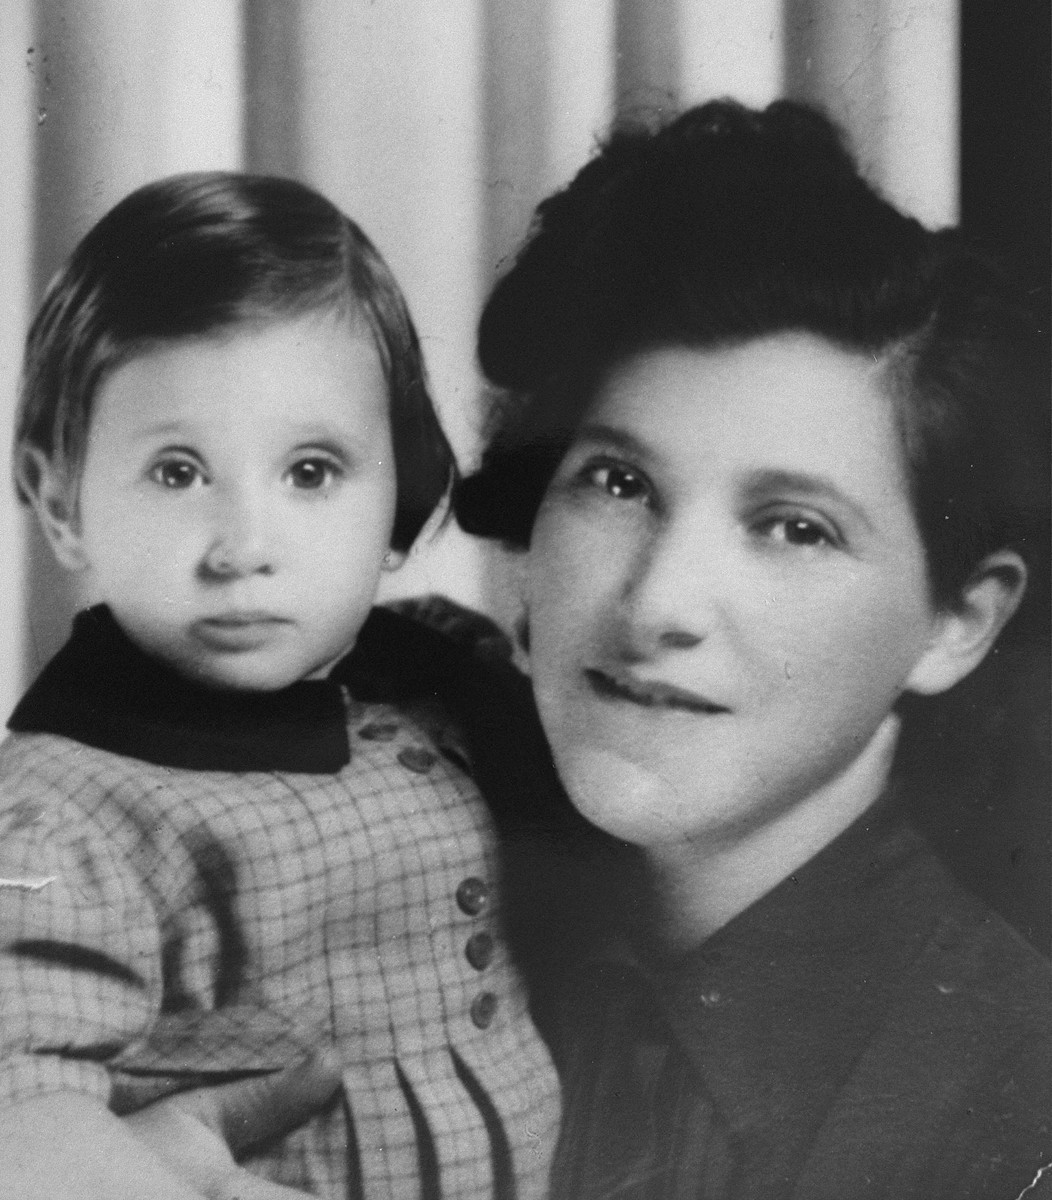 Portrait of a Jewish woman and her young daughter.

Pictured are Evi Weis with her mother, Magda Pollak Weisz, while en route out of Paris in 1941.